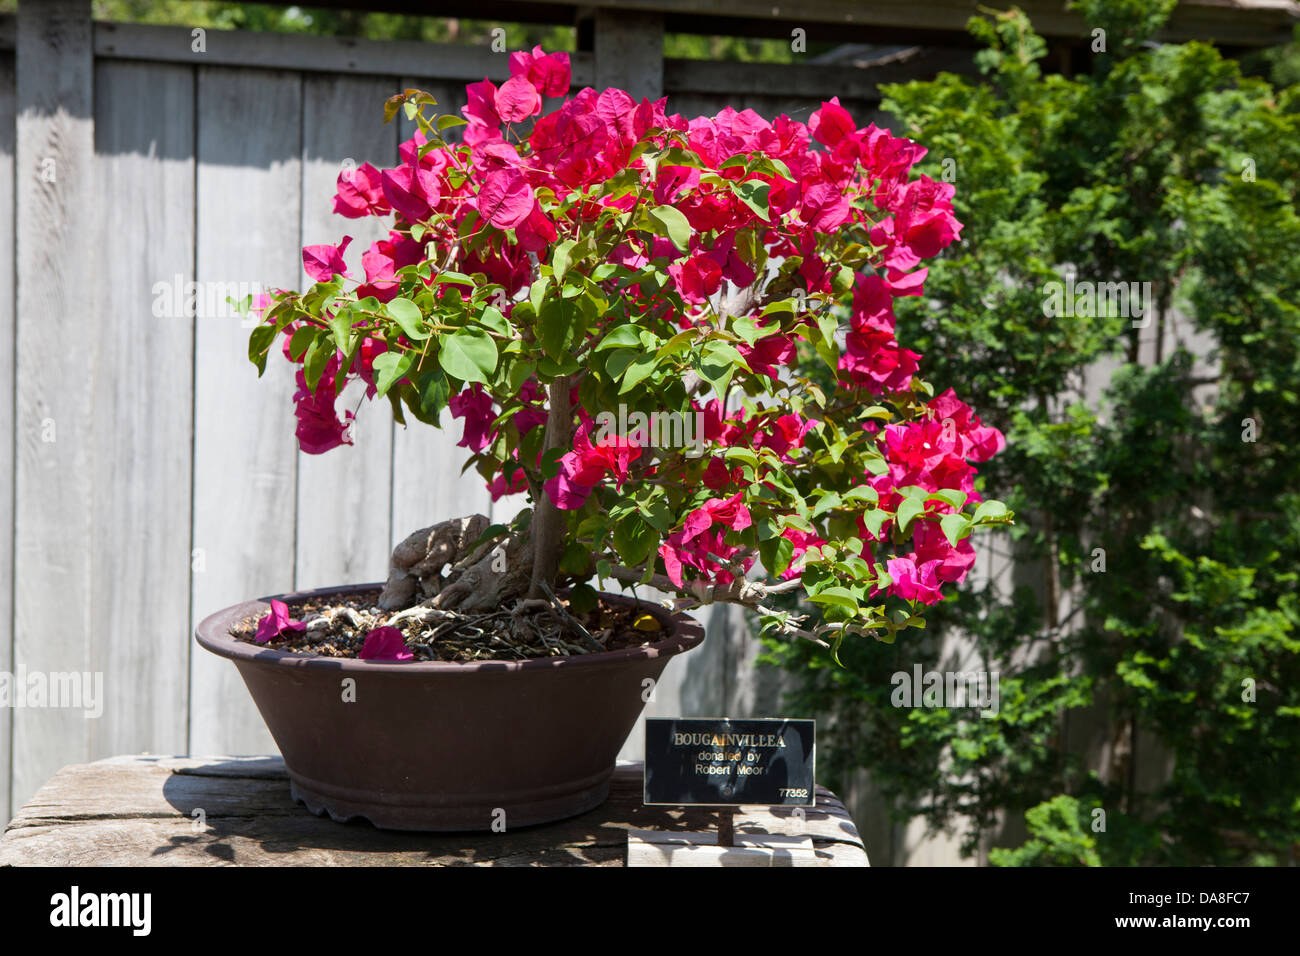 Bougainvillea Bonsai Tree High Resolution Stock Photography And Images Alamy